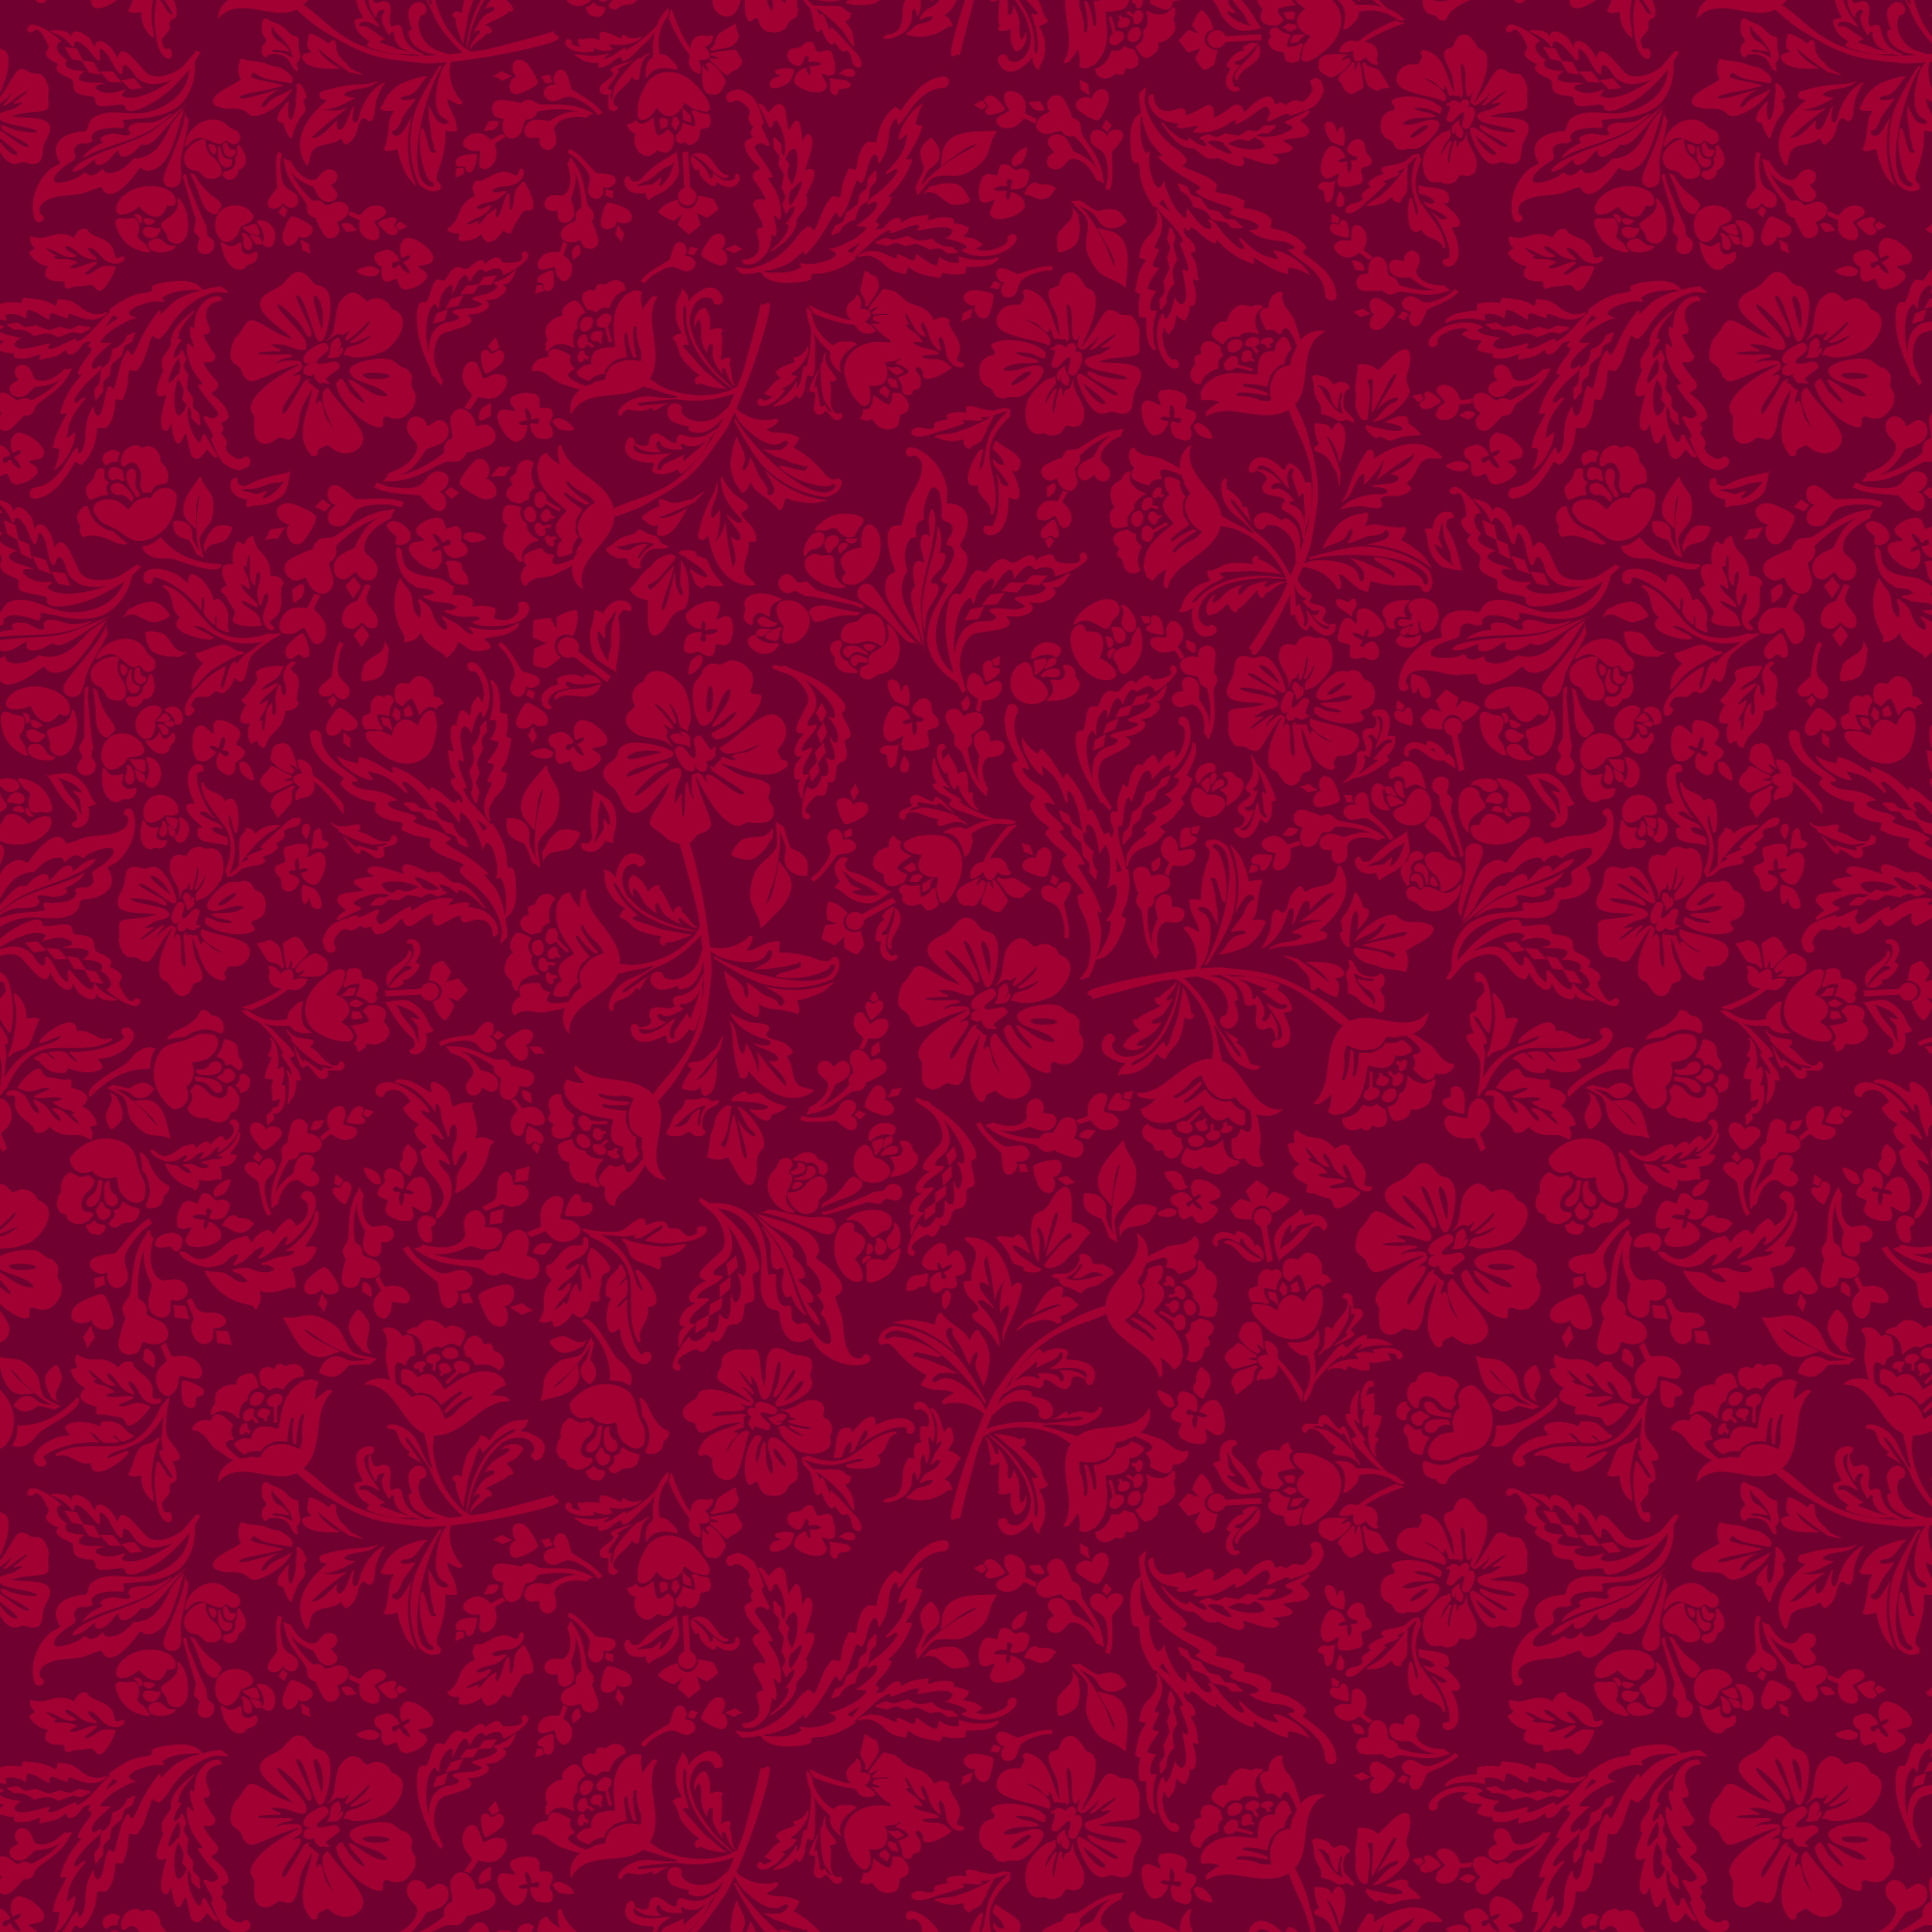 Waverly Inspirations 44" Cotton Paris Floral Fabric by the Yard, Red Plum - image 1 of 2